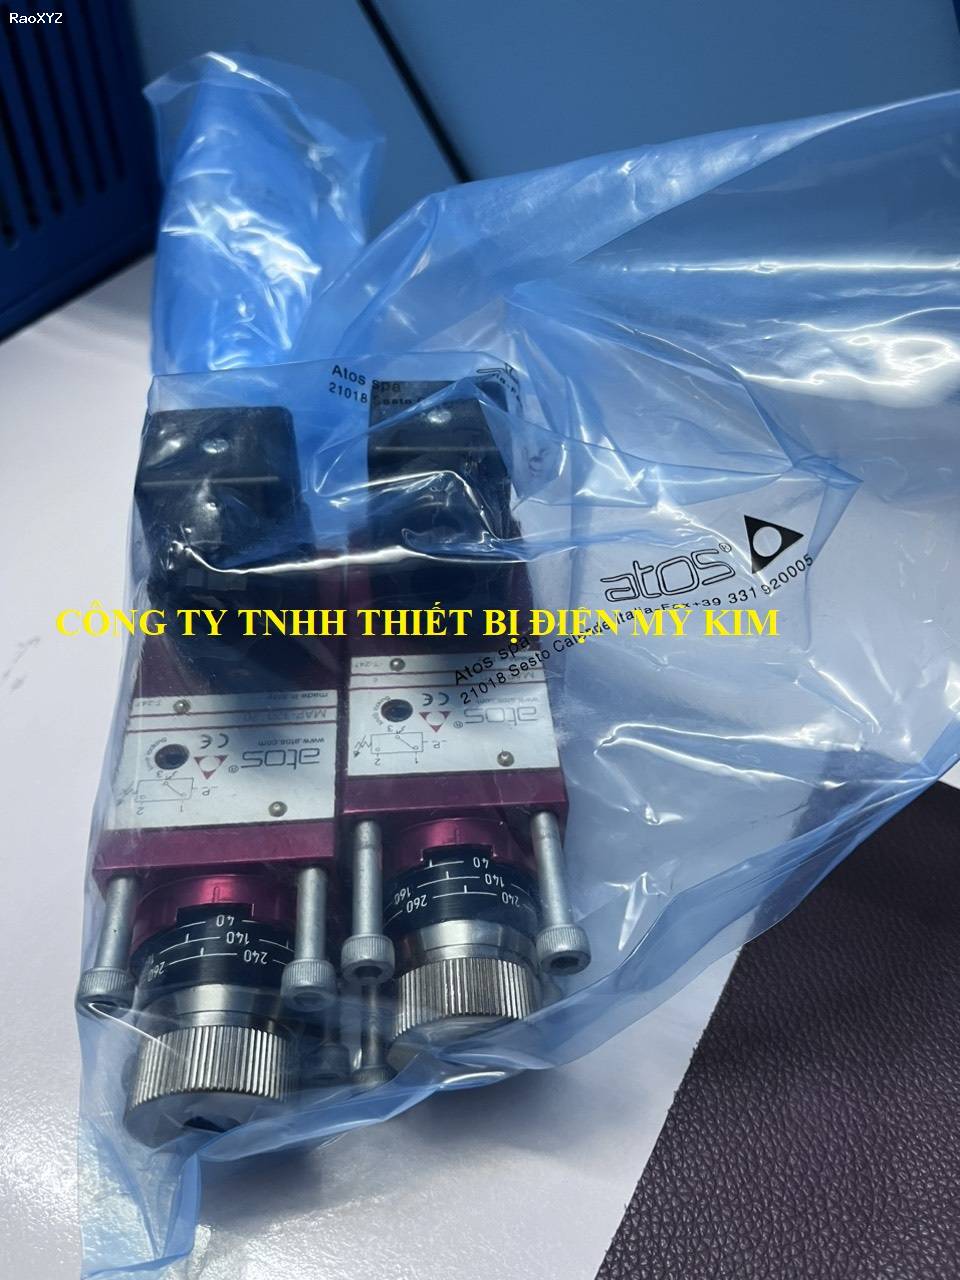 Van thuỷ lực Atos  RZMO-TERS-PS-010/210 54